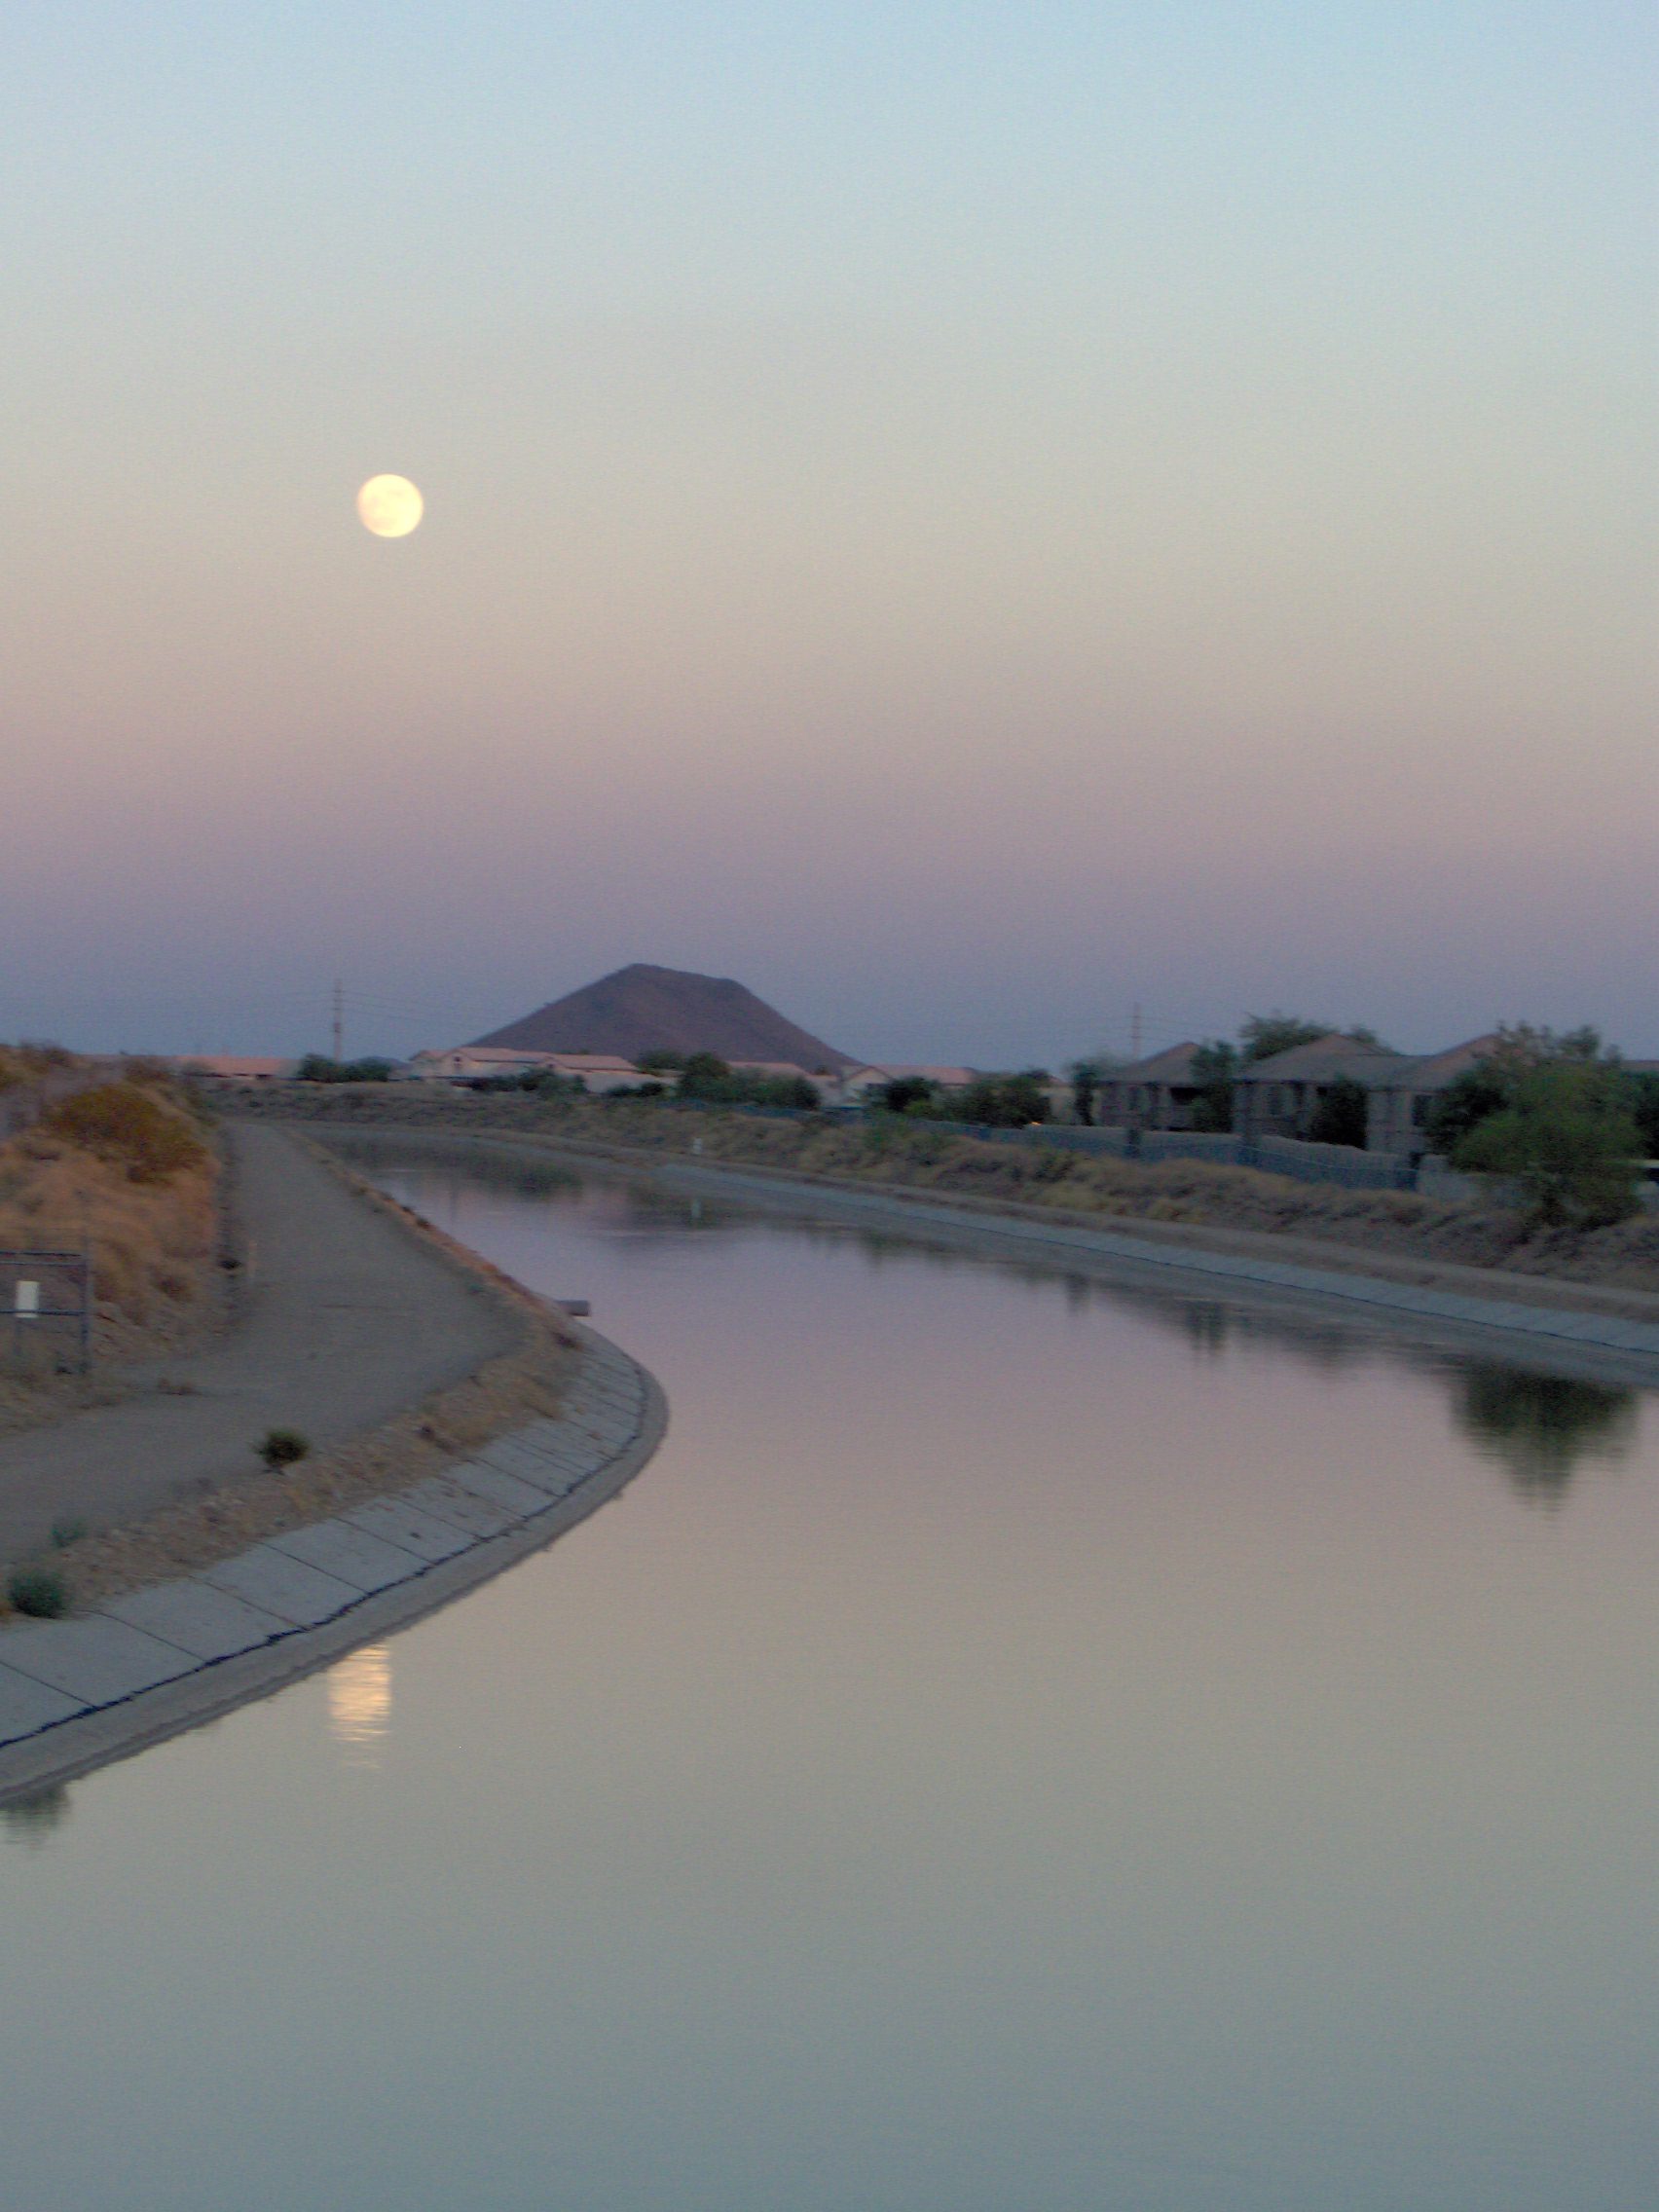 Central Arizona Project canal that carries Colorado River water